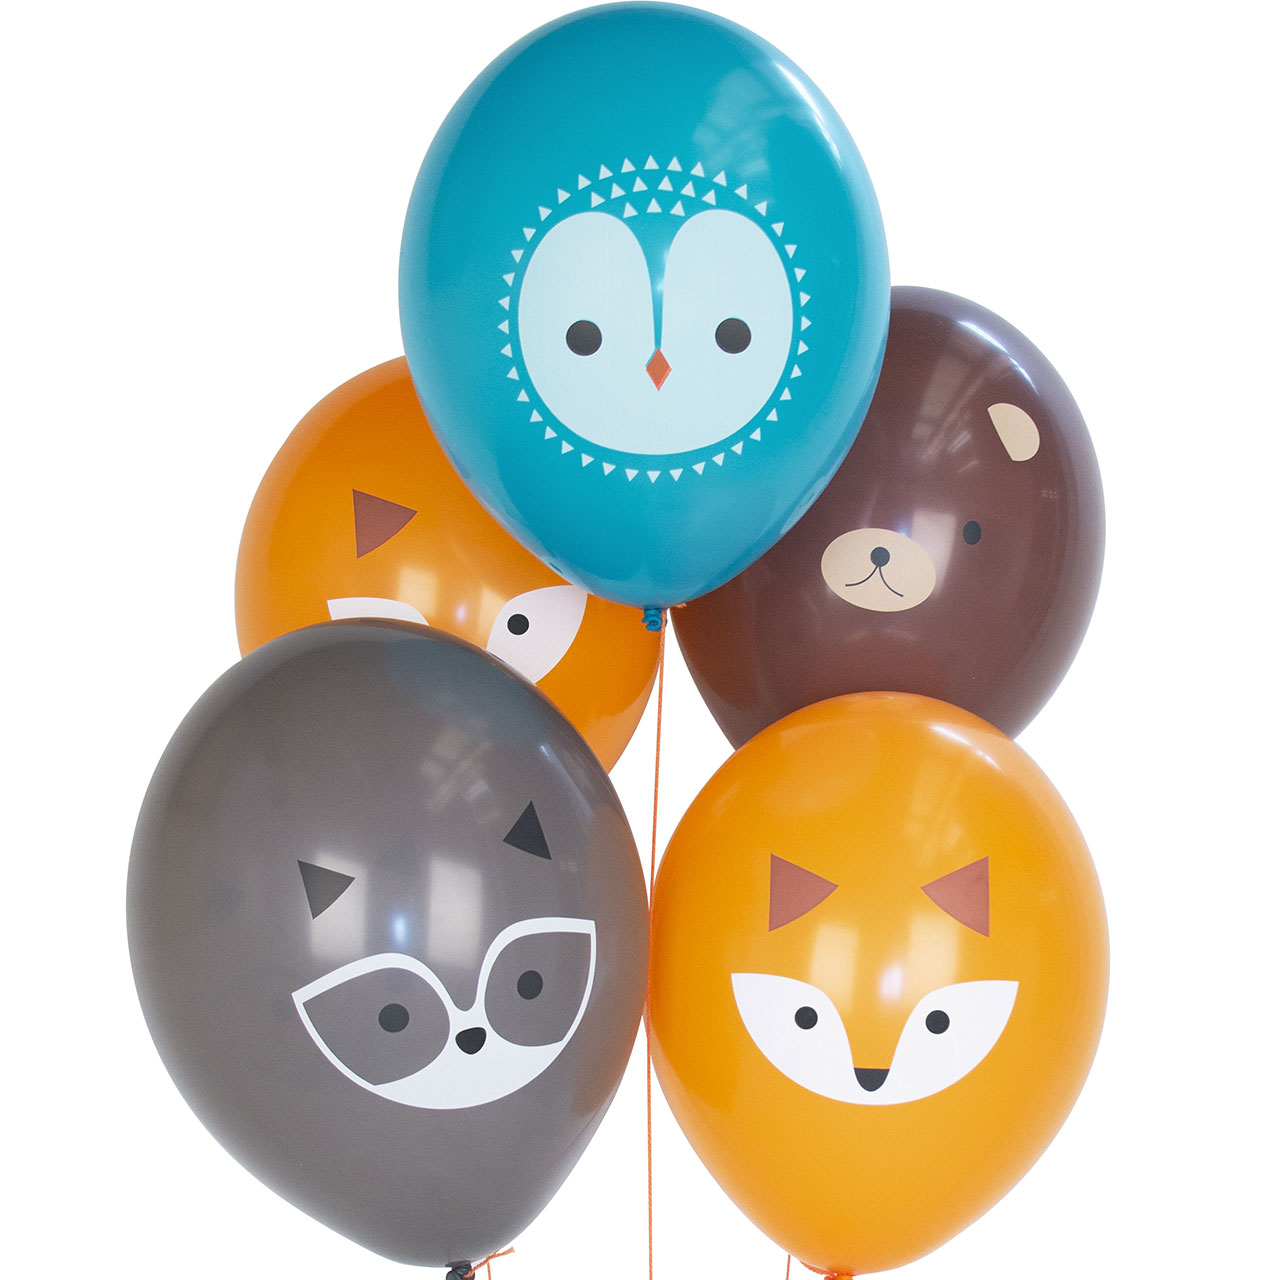 5 Ballons Waldtiere